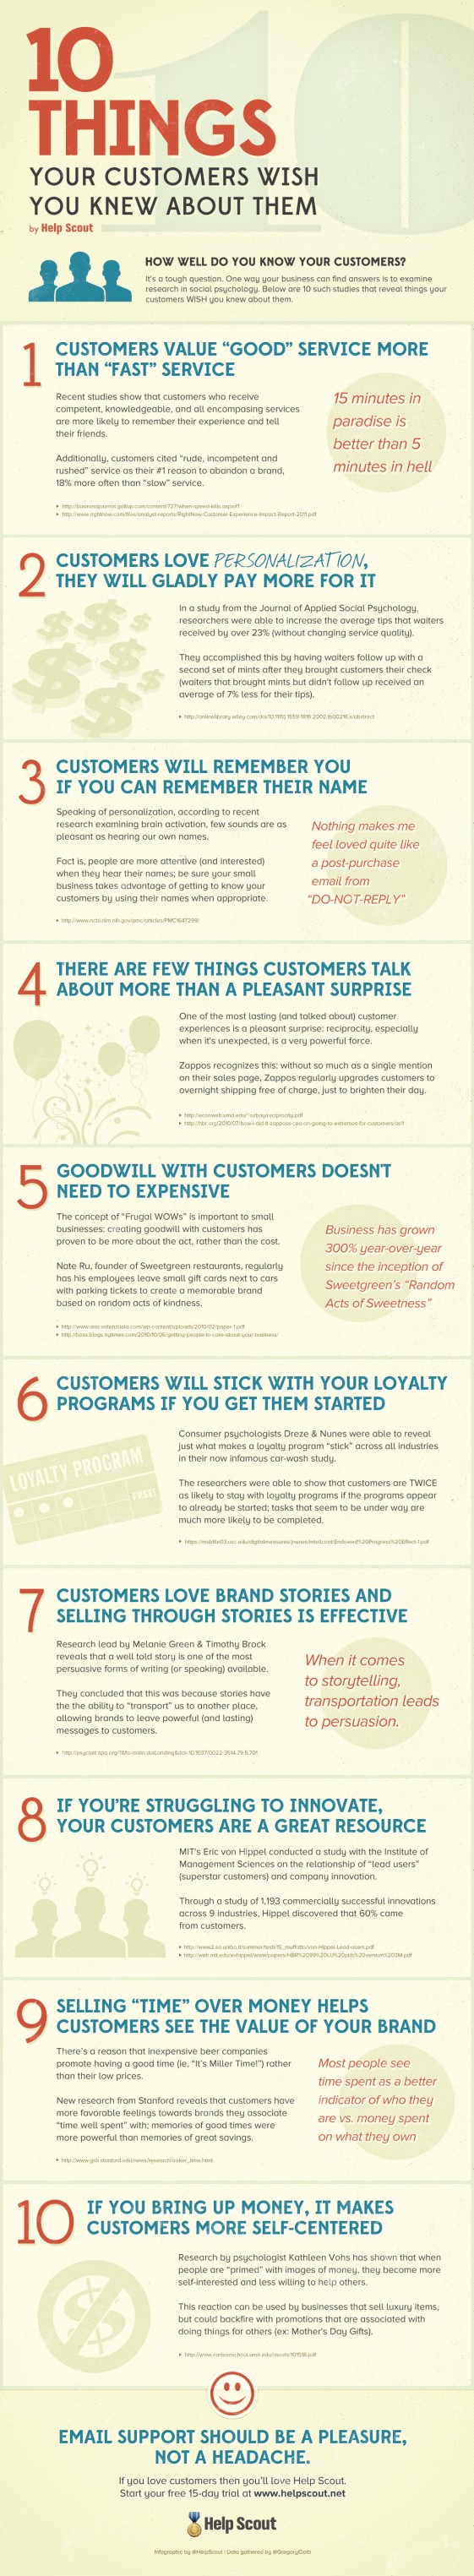 10 Things Your Customers Wish You Knew About Them